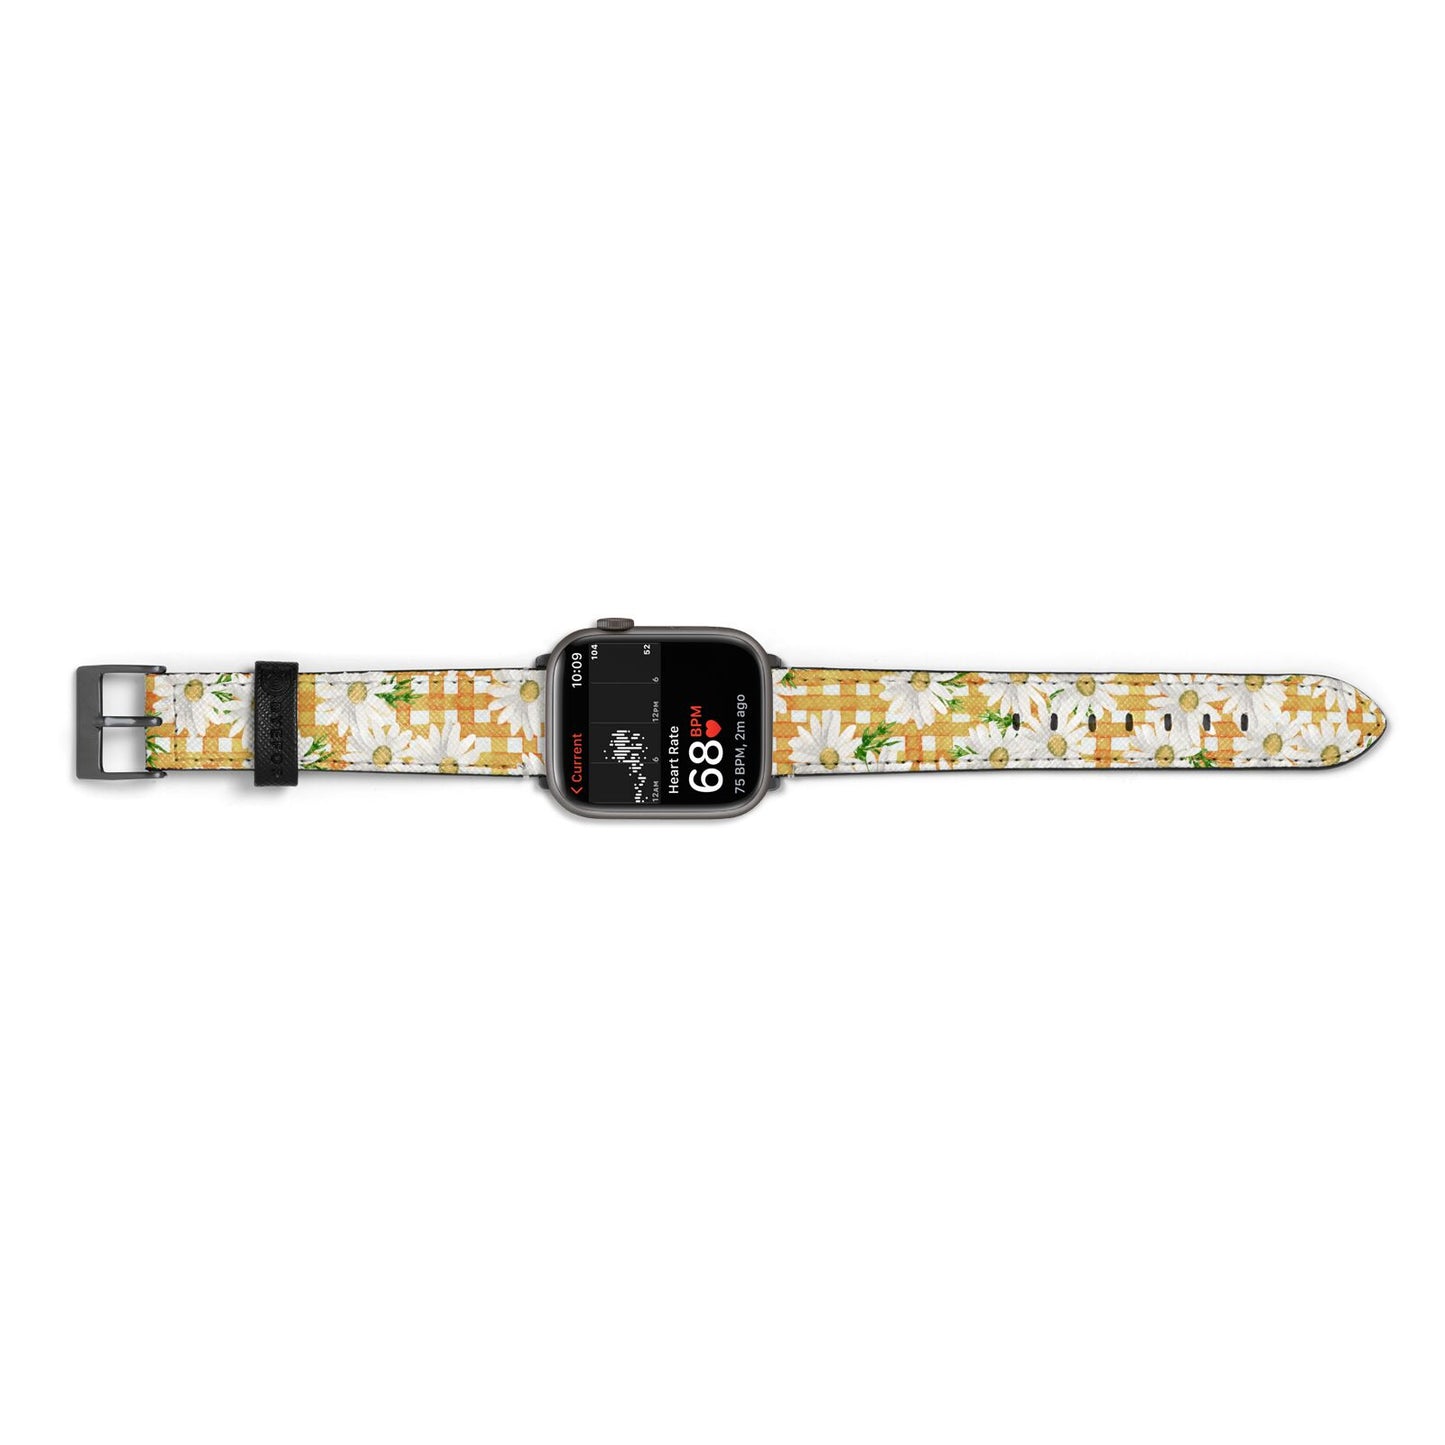 Checkered Daisy Apple Watch Strap Size 38mm Landscape Image Space Grey Hardware